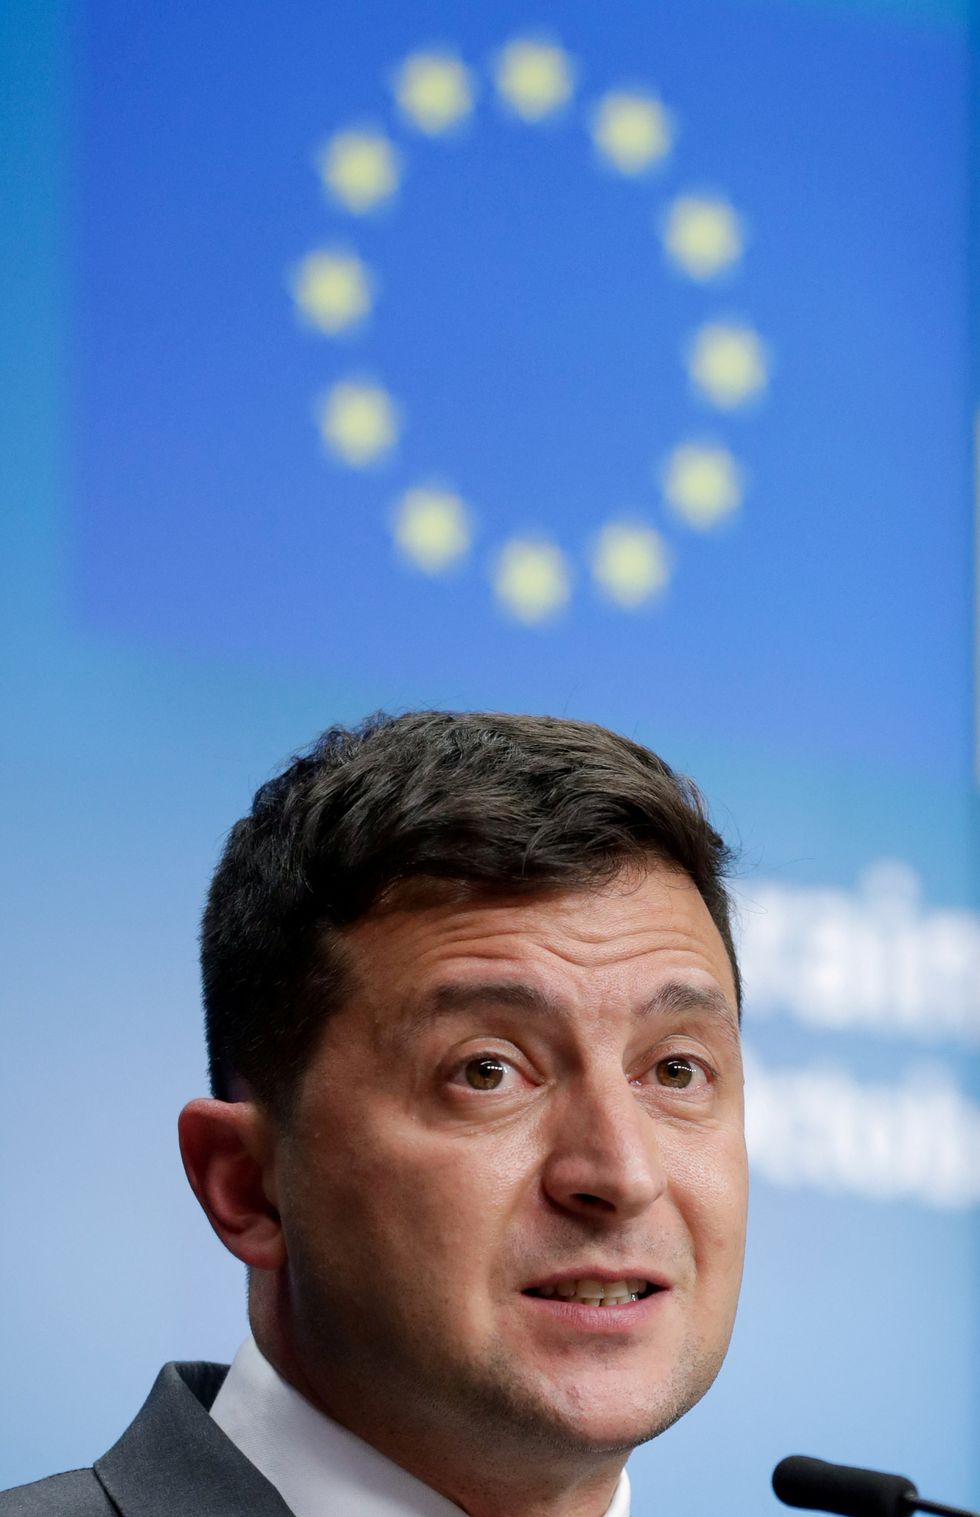 Ukrainian President Volodymyr Zelensky gives a news conference at the end of an EU-Ukraine Summit at the European Council in Brussels, Belgium.